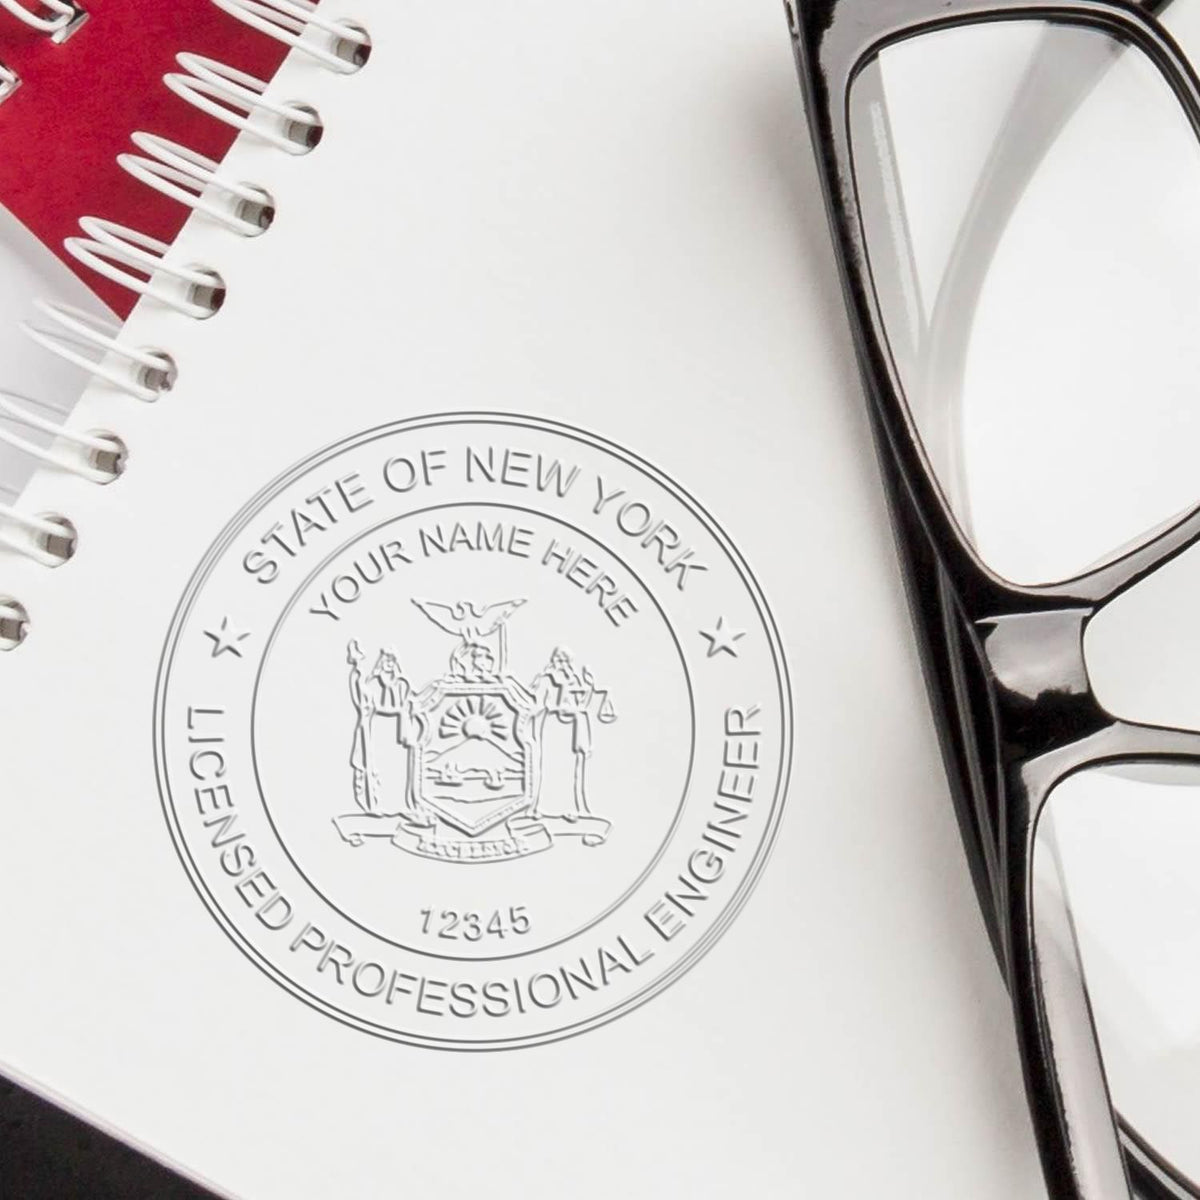 A photograph of the Soft New York Professional Engineer Seal stamp impression reveals a vivid, professional image of the on paper.